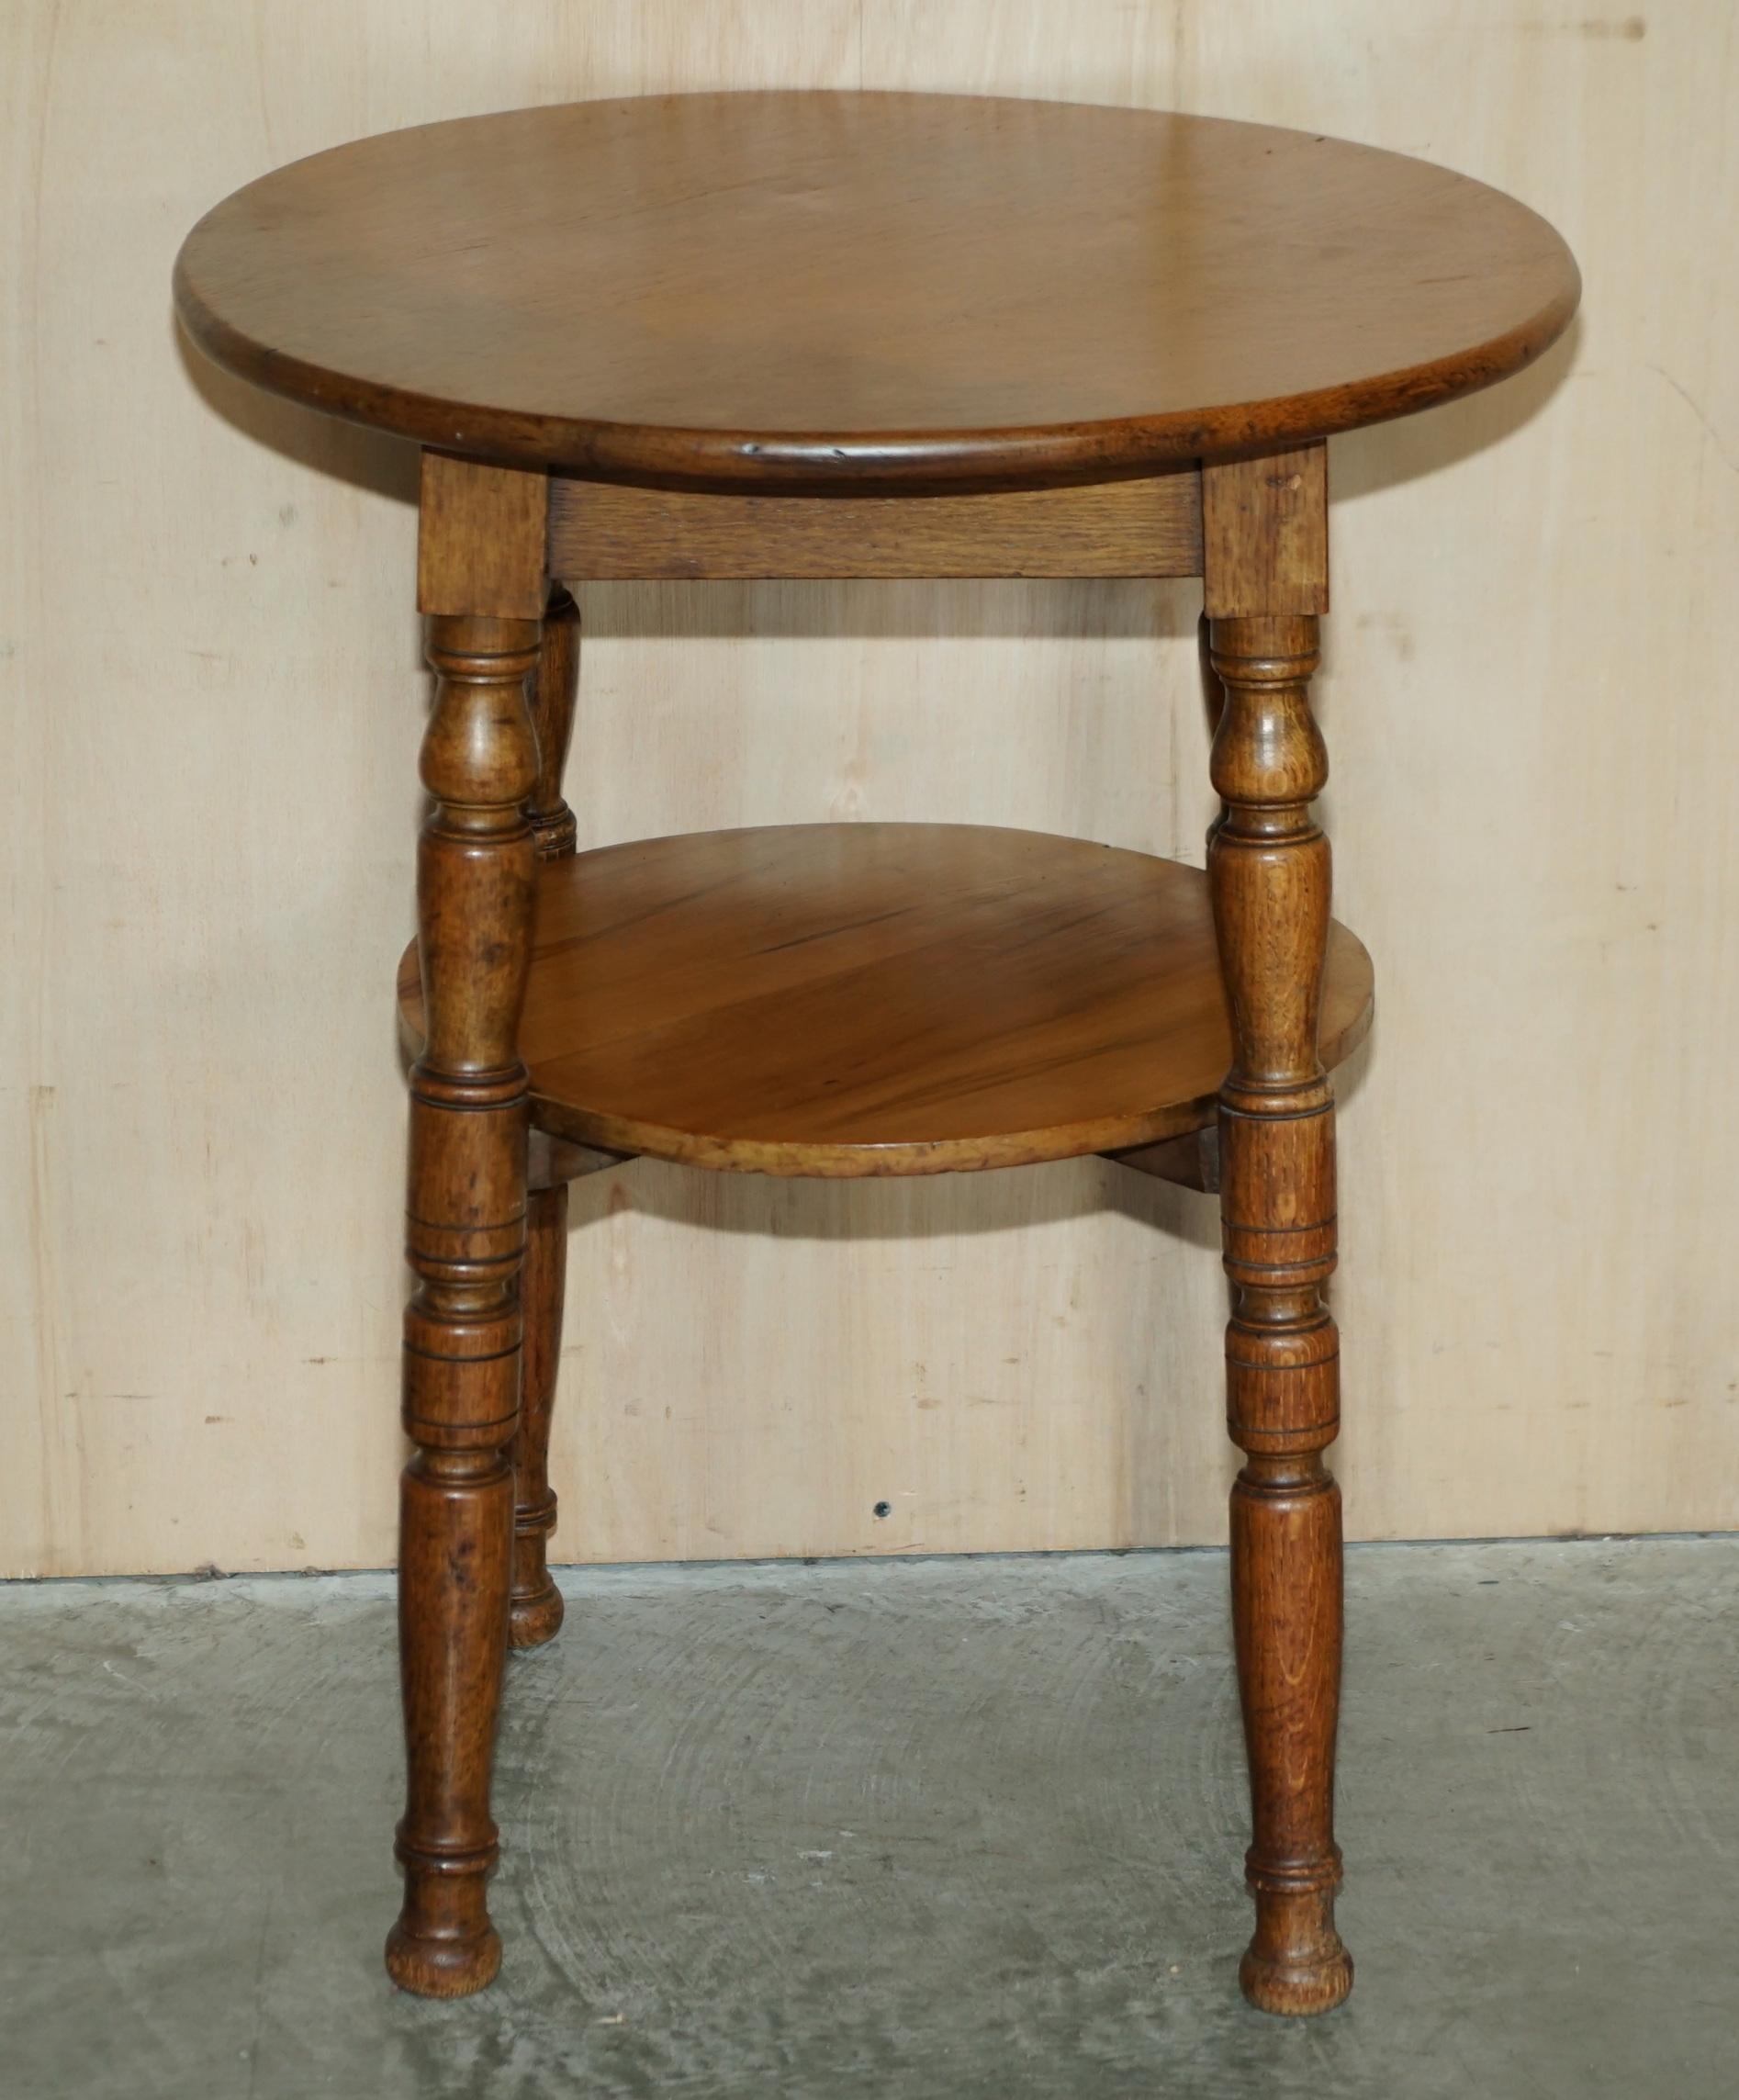 Lovely circa 1900 English Oak Side Table with Turned Legs and a Nice Rich Patina For Sale 8